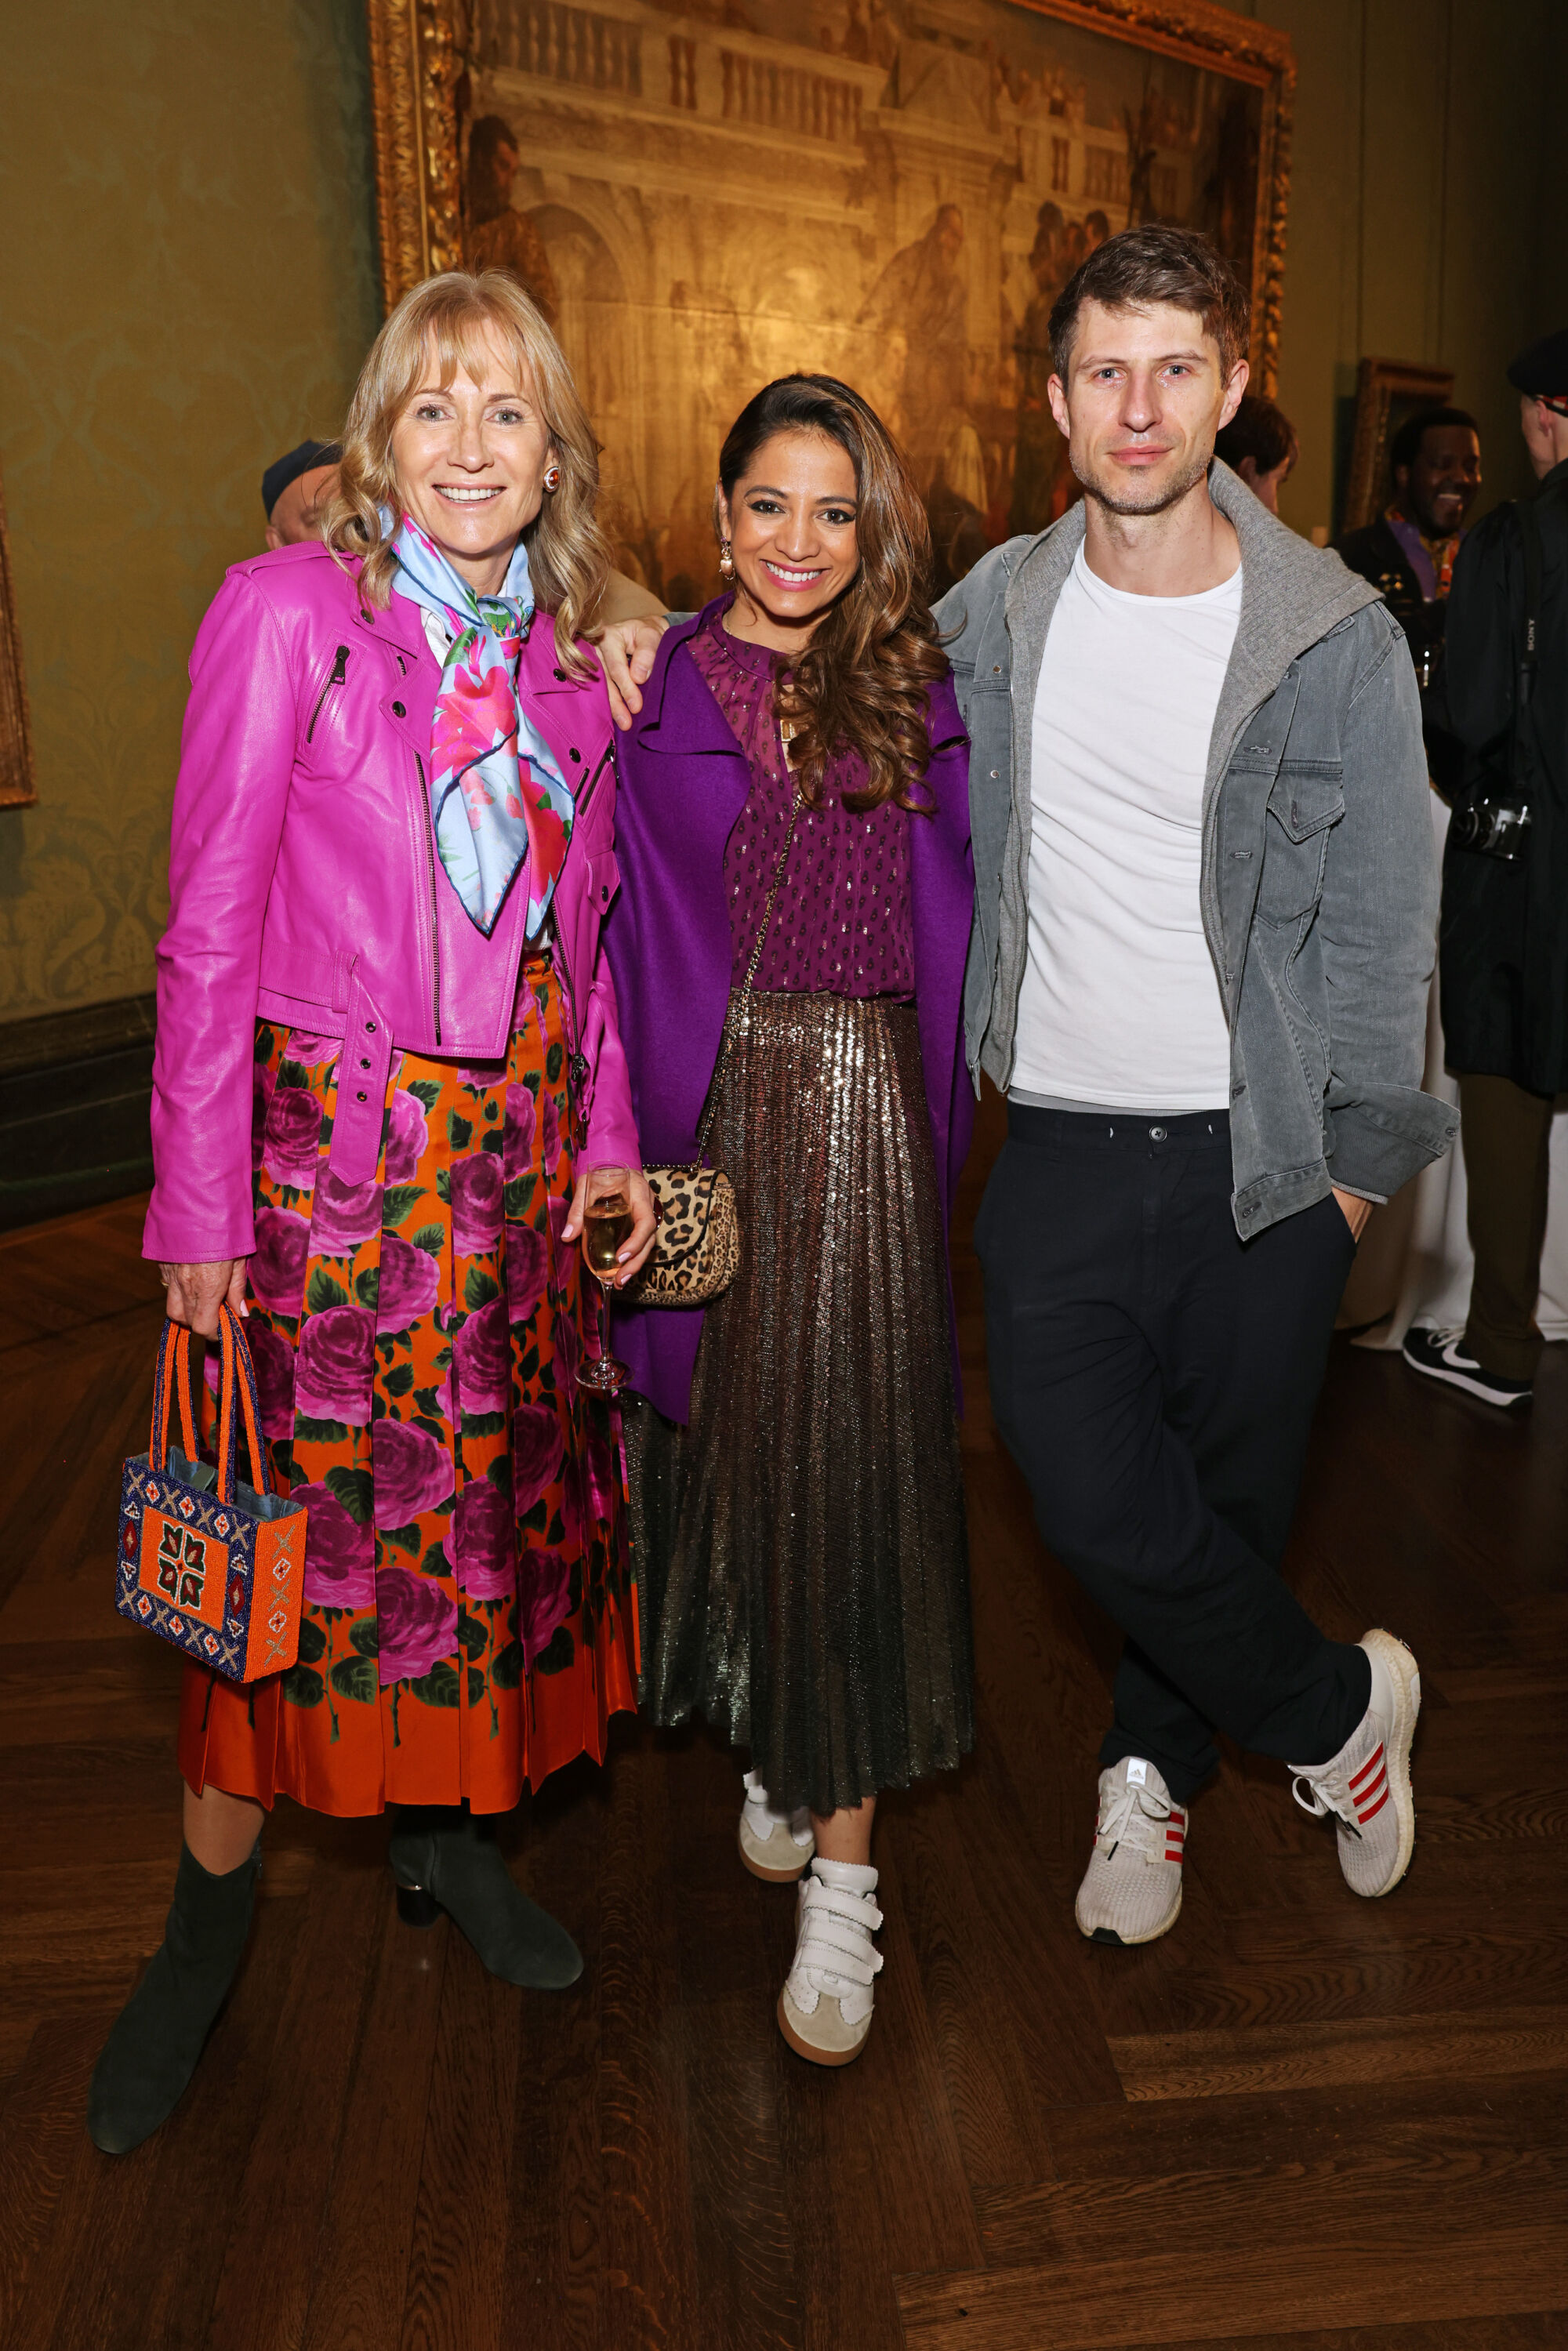 The Wick - Lady Alison Myners, Katy Wickremesinghe and Nick Hornby attend the launch of Tim Yip’s LOVE INFINITY on MUBI at the National Gallery, March 2022